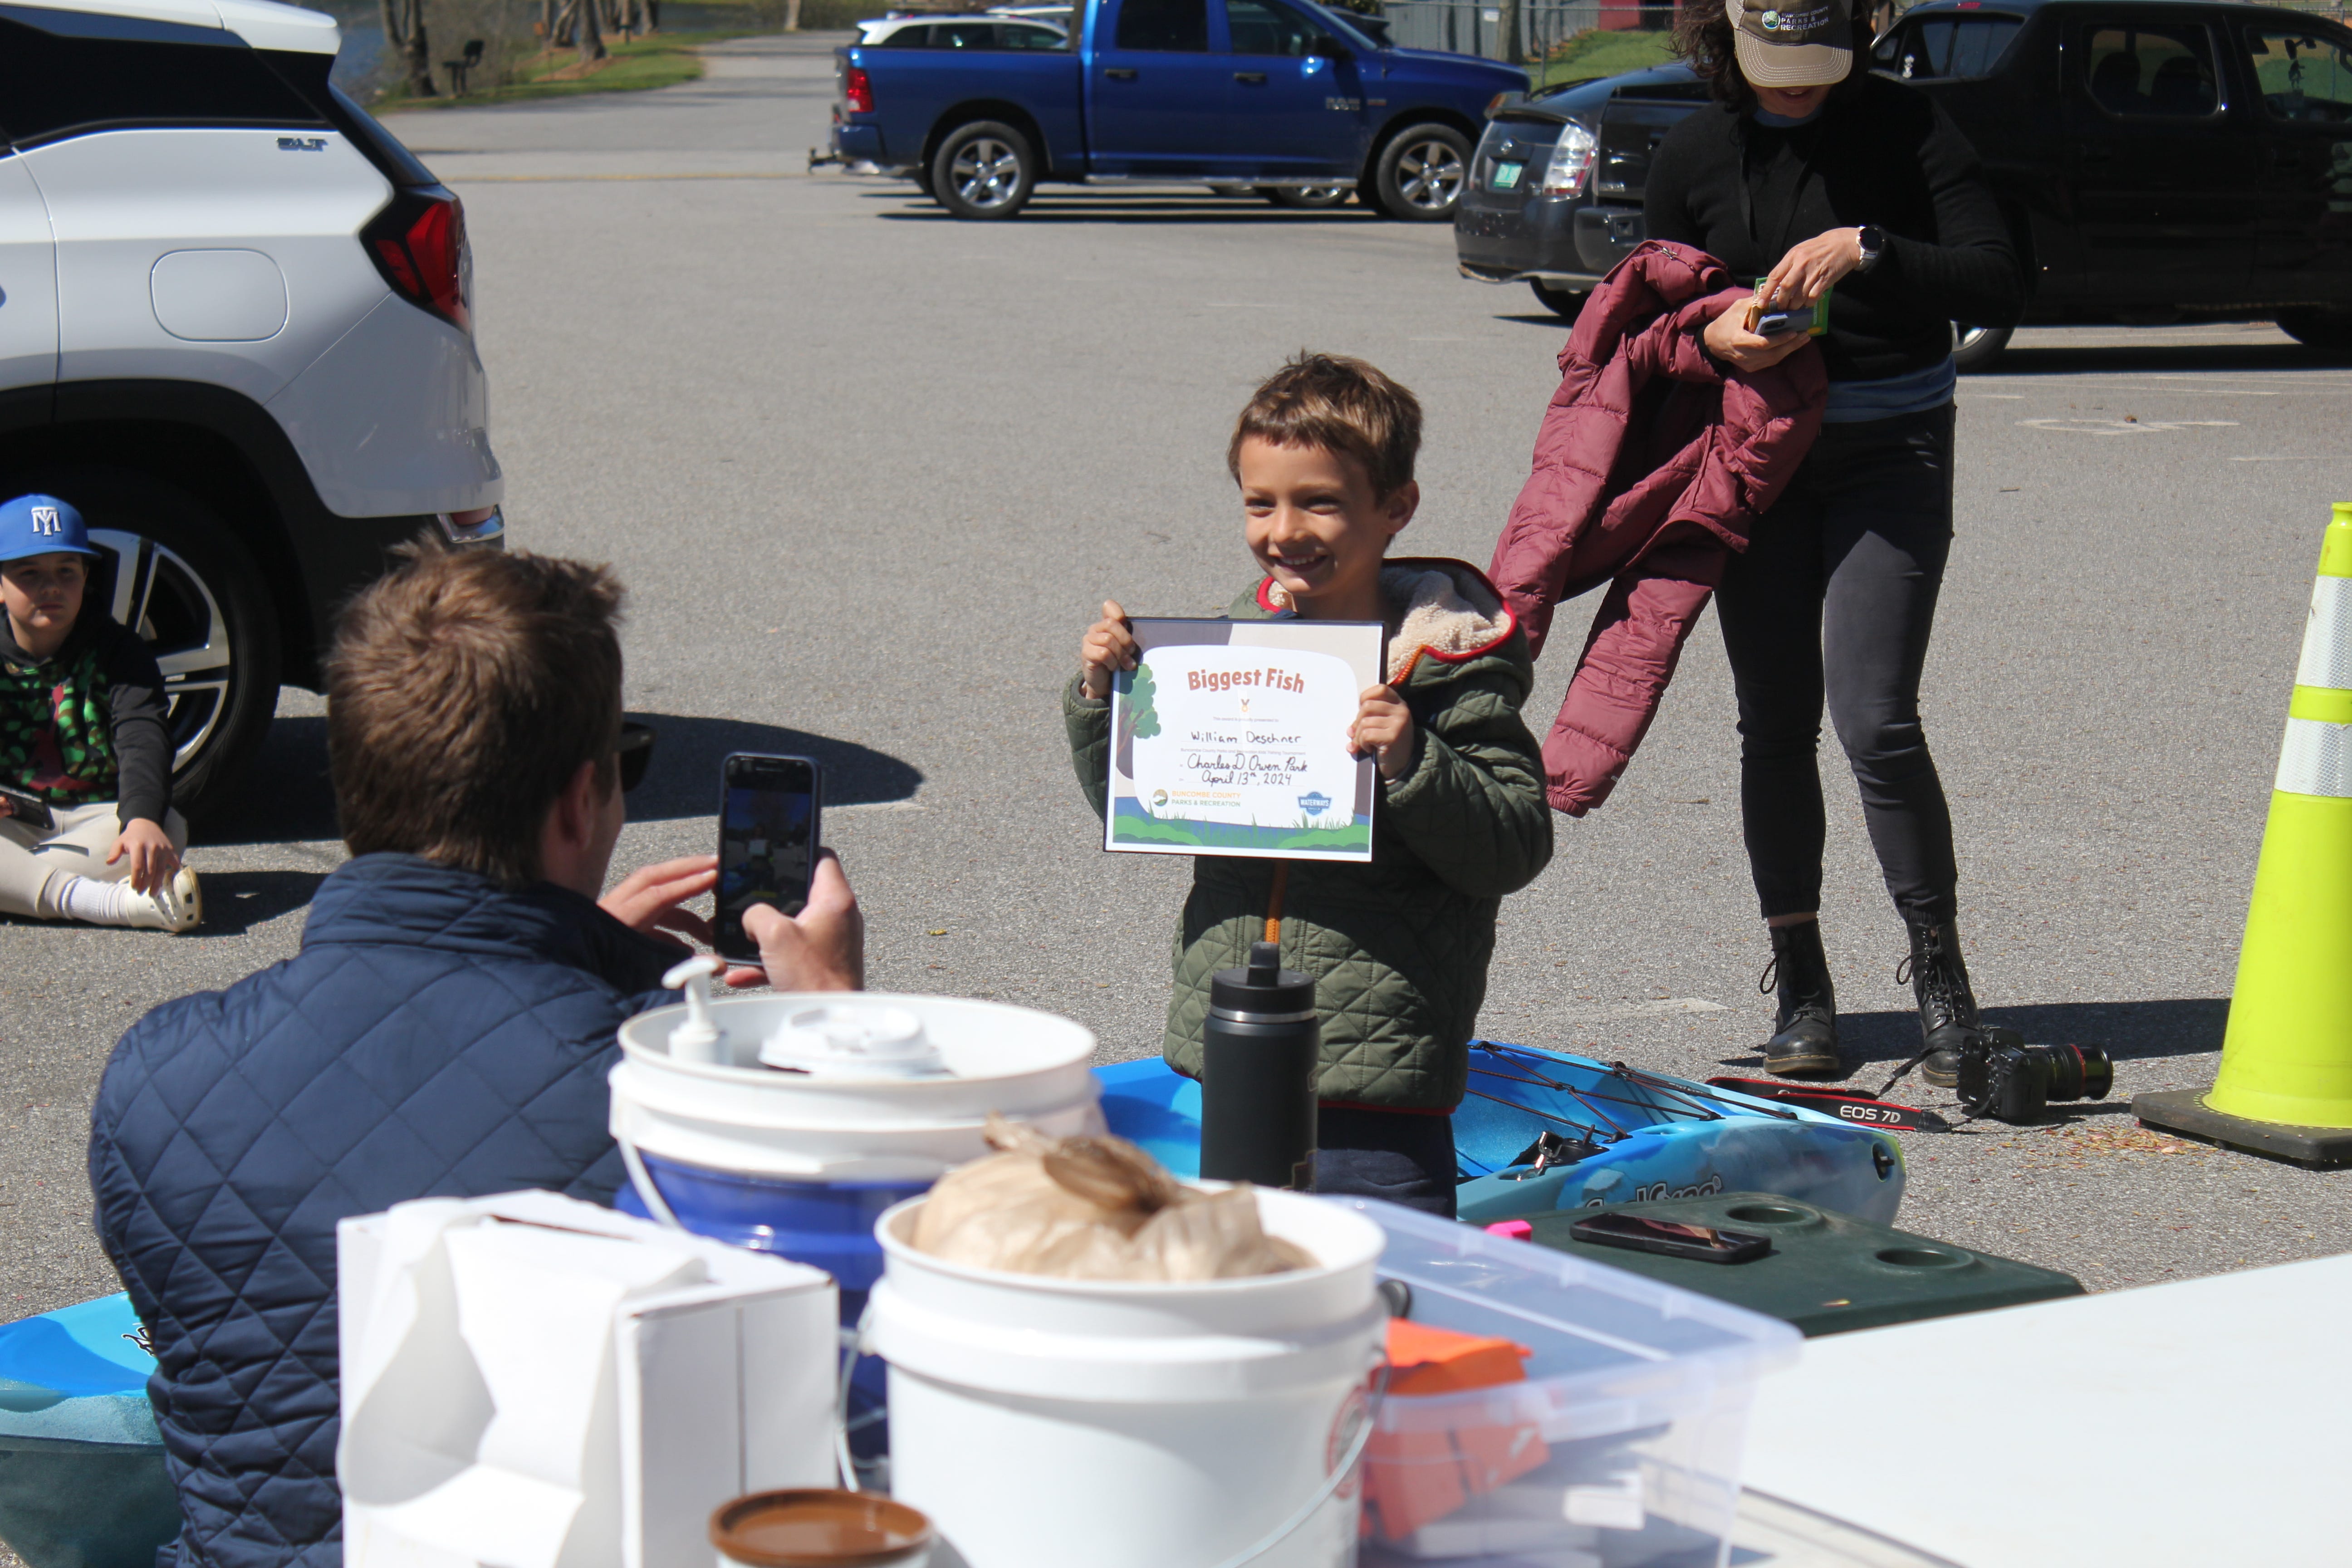 With a catch of a 13.5 inch bass, William Deschner won the grand prize of Buncombe County Parks and Recreation's kids fishing tournament at Charles D. Owen Park April 13, 2024.